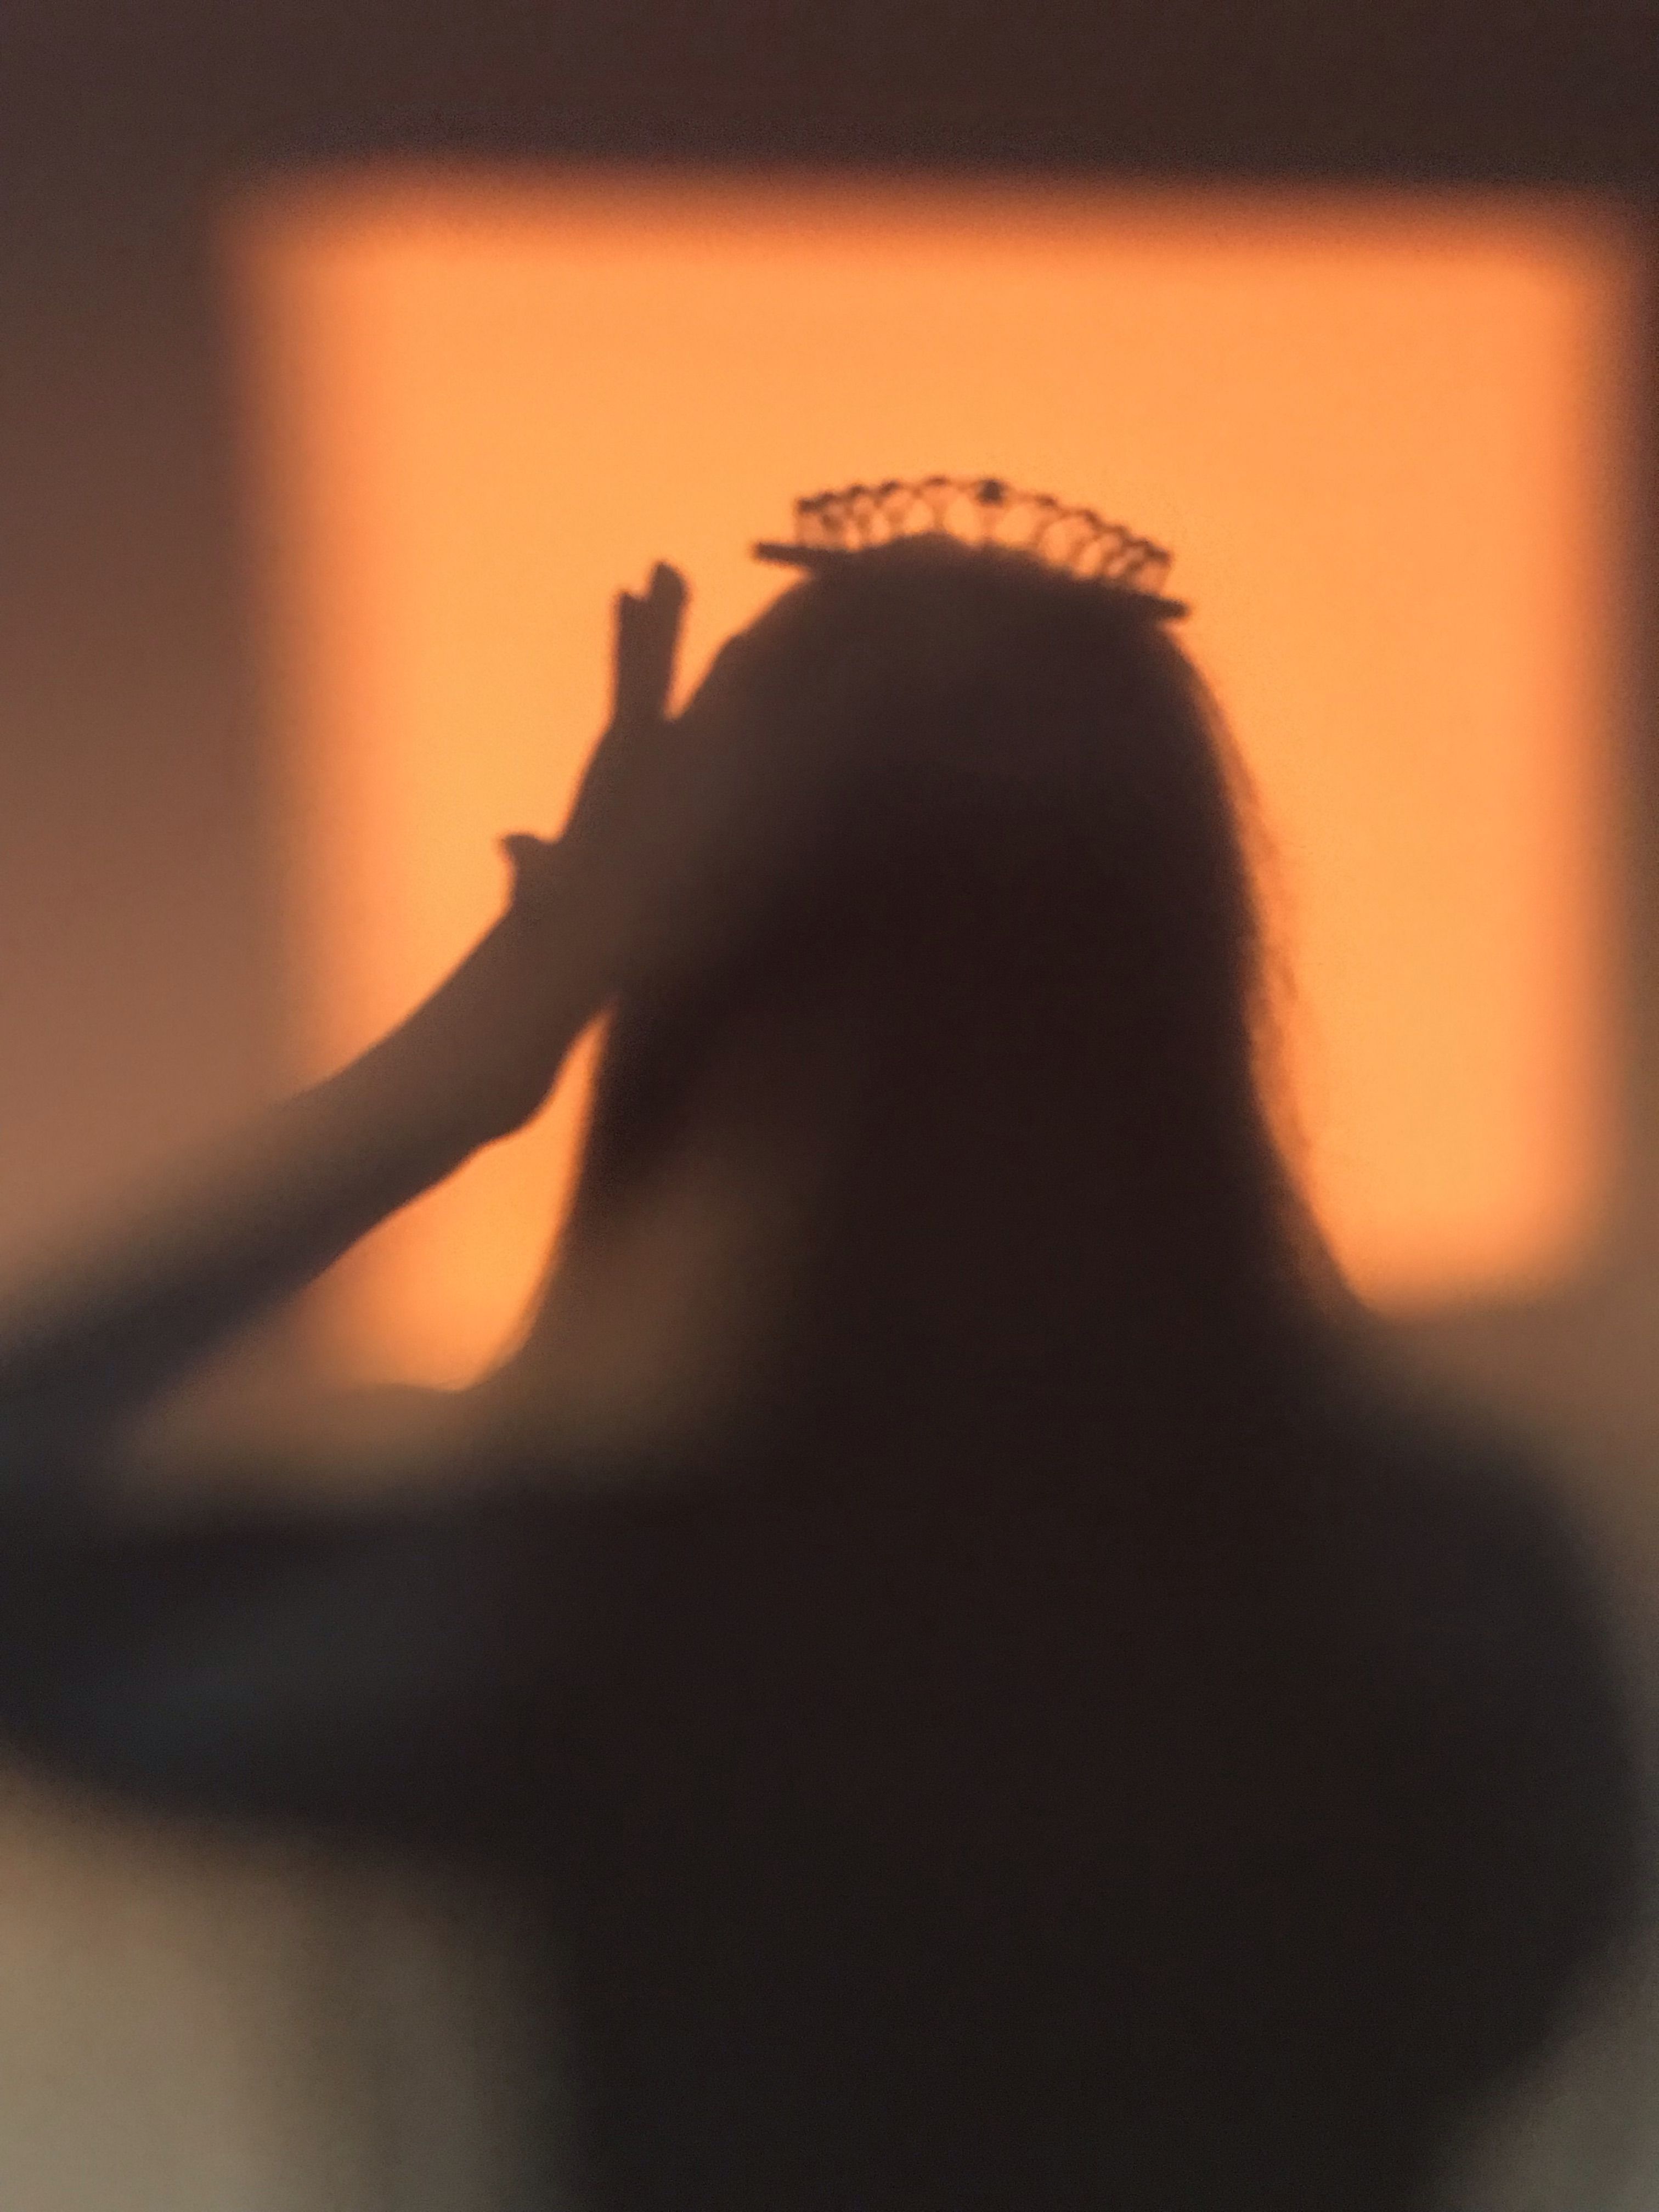 Shadow of woman with crown on head · Free